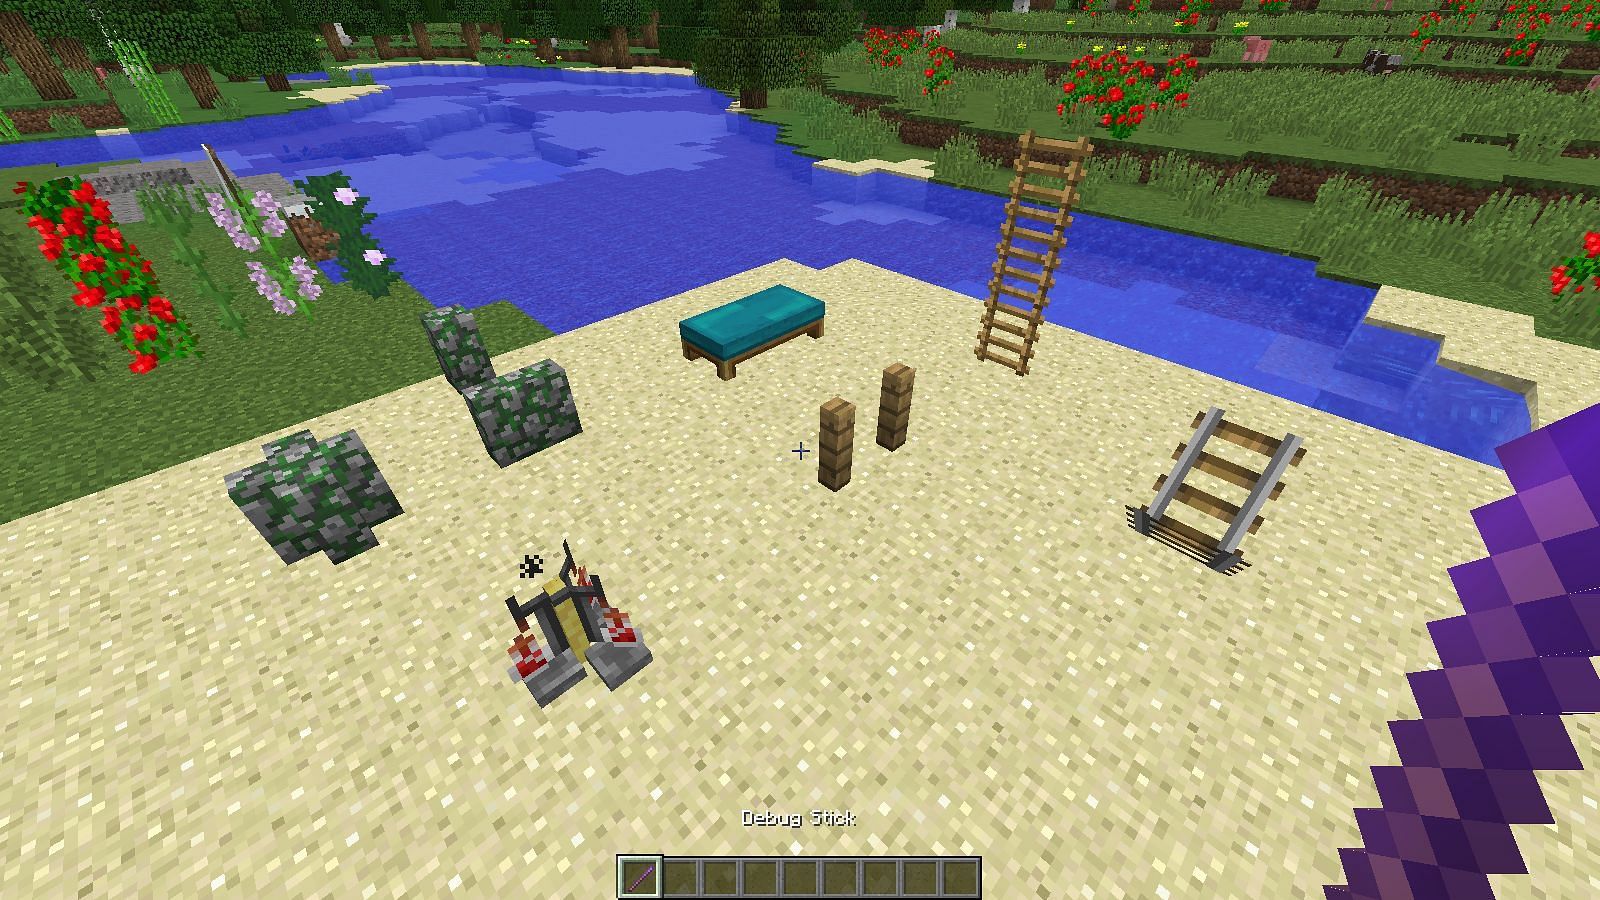 An example of block states being changed by a debug stick (Image via Mojang)